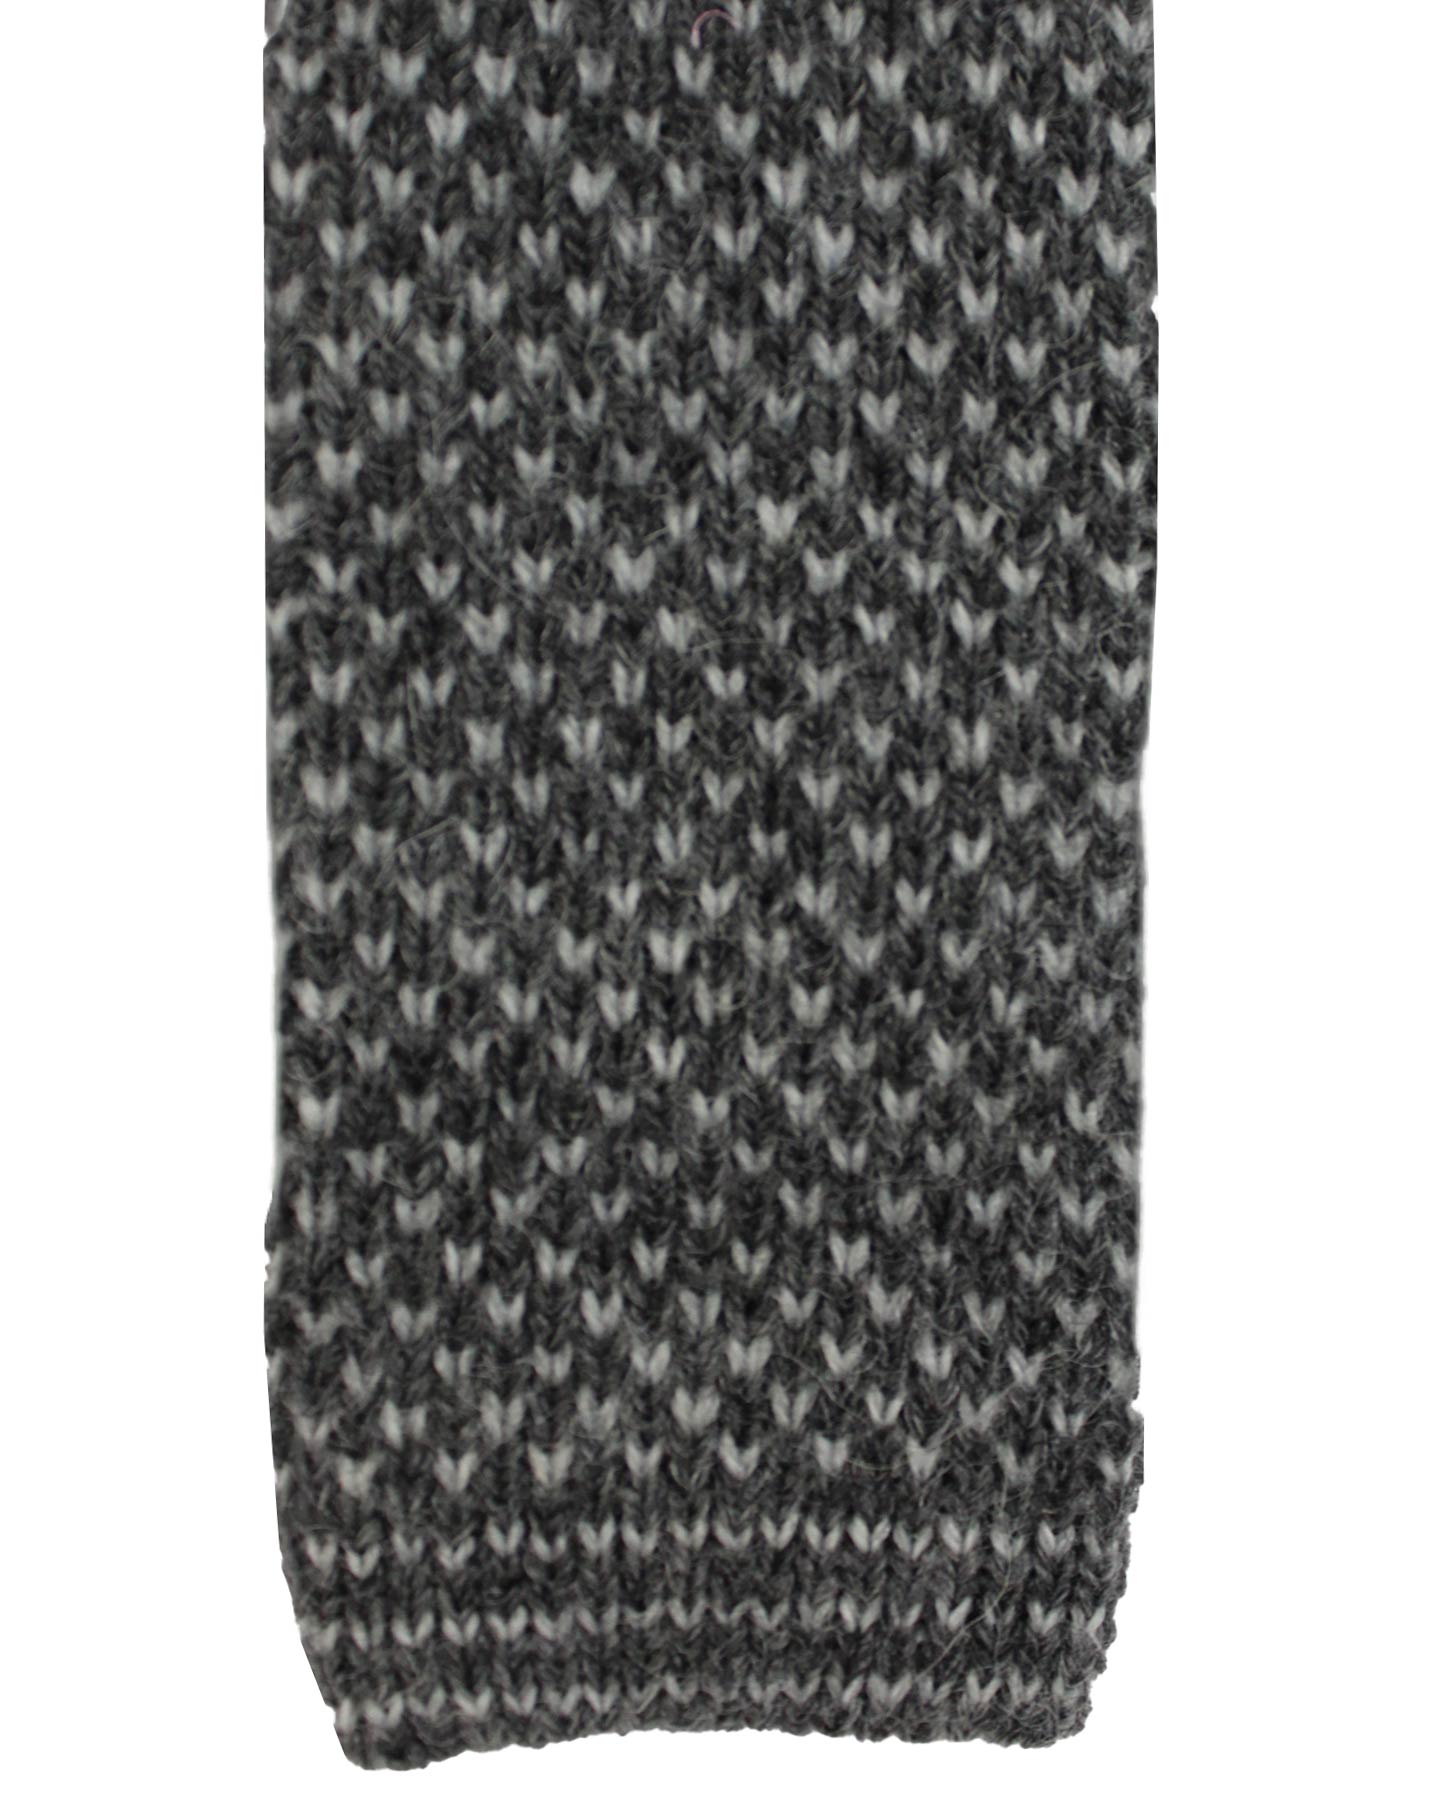 New Kiton Square End Knitted Tie Gray